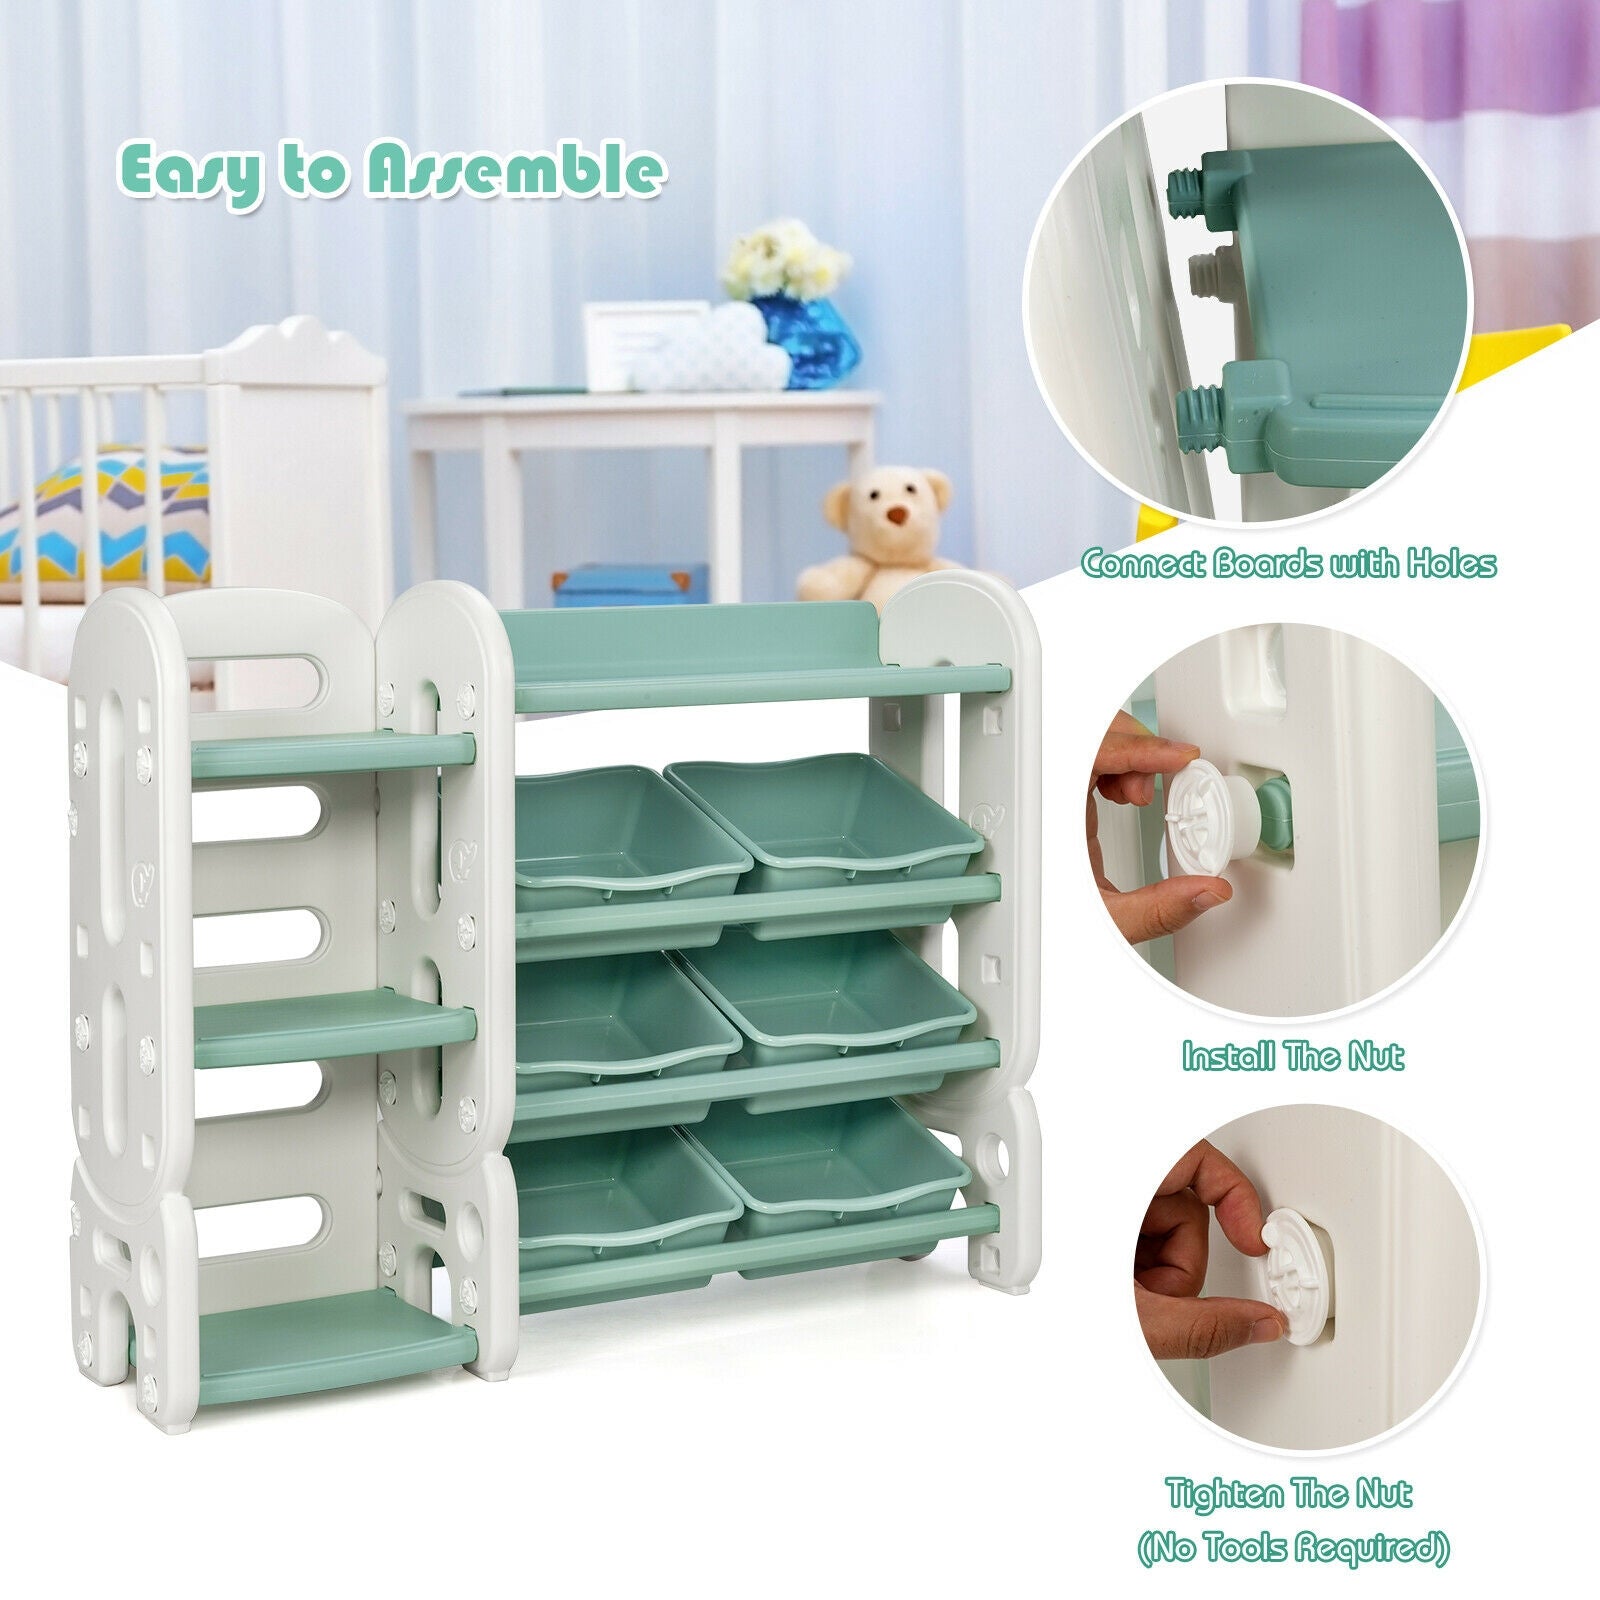 Easy Assembly: Assembling the children's toy shelf unit is a breeze, requiring just a single coin or the edge of a nut. The lightweight, removable storage boxes can be effortlessly taken off. Additionally, the smooth and waterproof storage boxes make cleaning a convenient task.